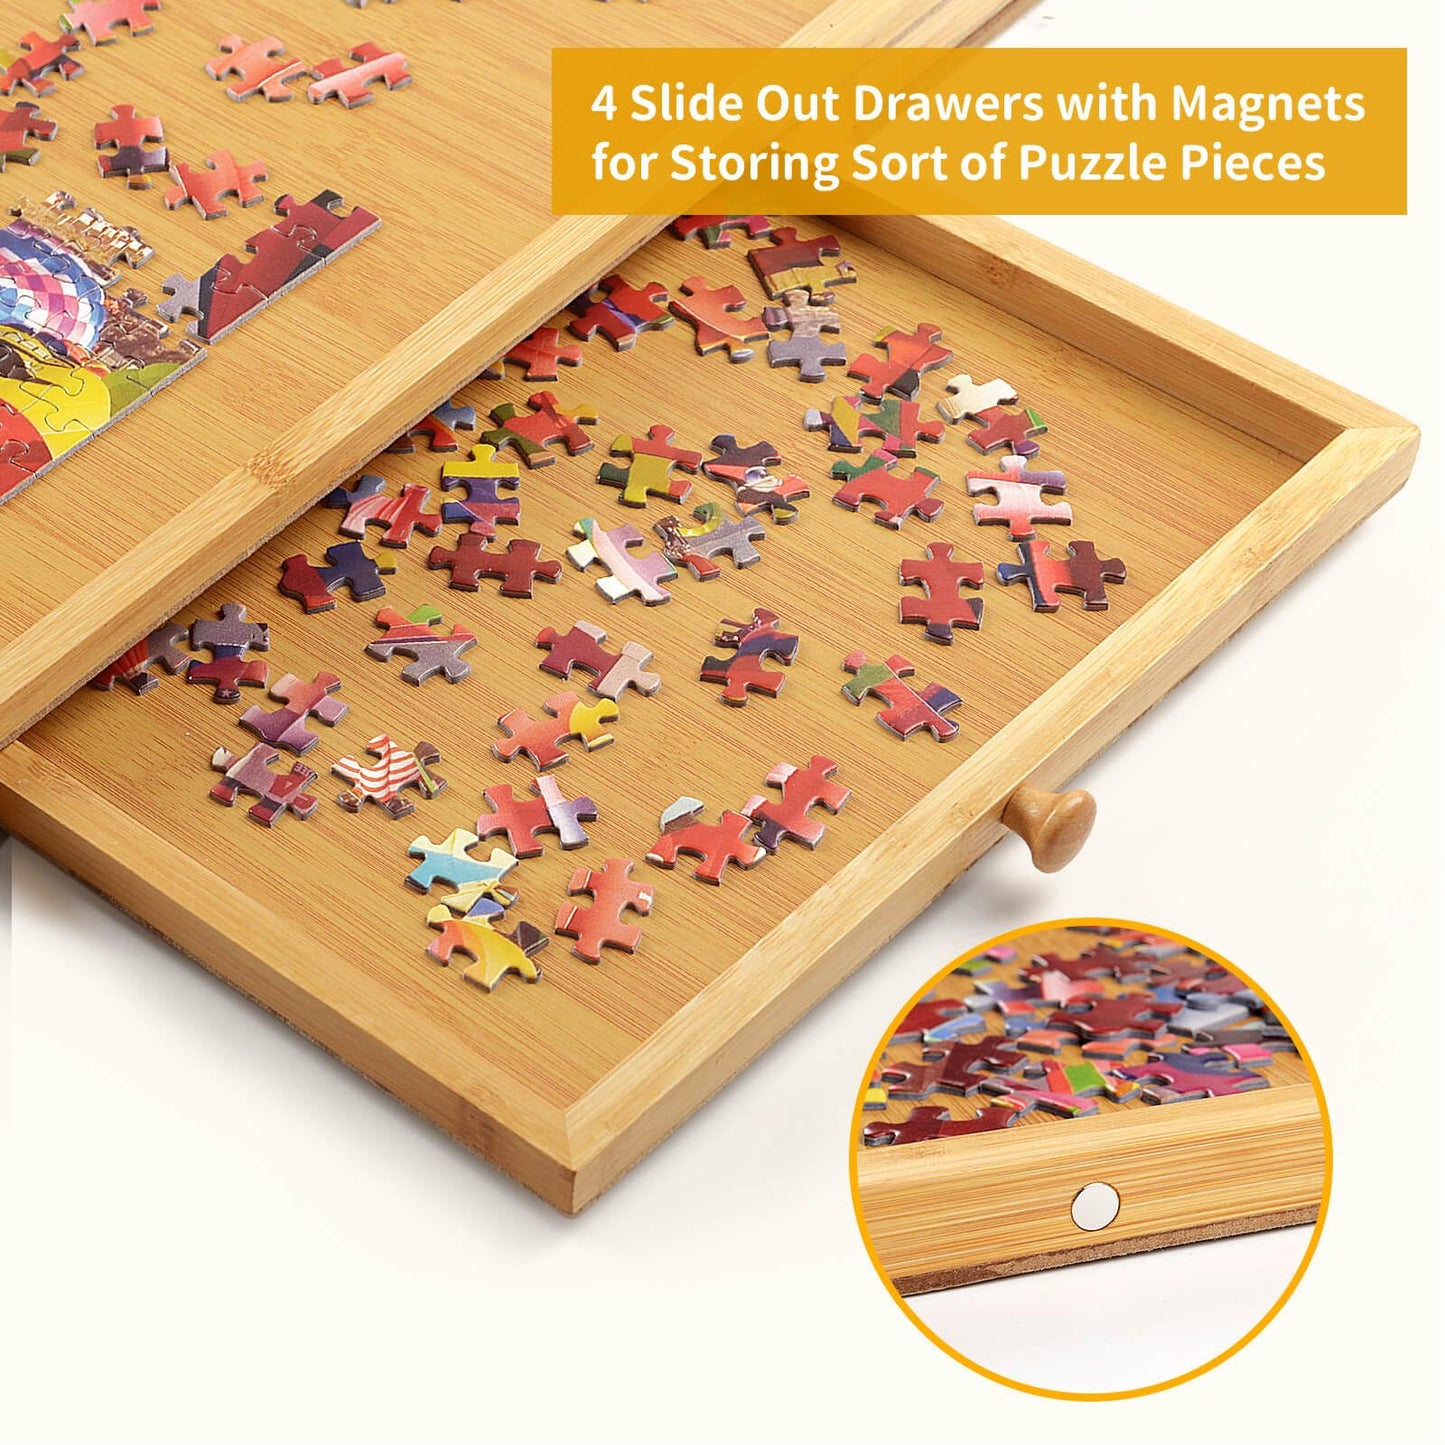 Jigsaw Puzzle Board Table for Adults - 1500 Pieces Bamboo Puzzle Board with 4 Drawers, Jigsaw Puzzle Table Accessories for Puzzle Storage, 26"×34" Portable Puzzle Tray